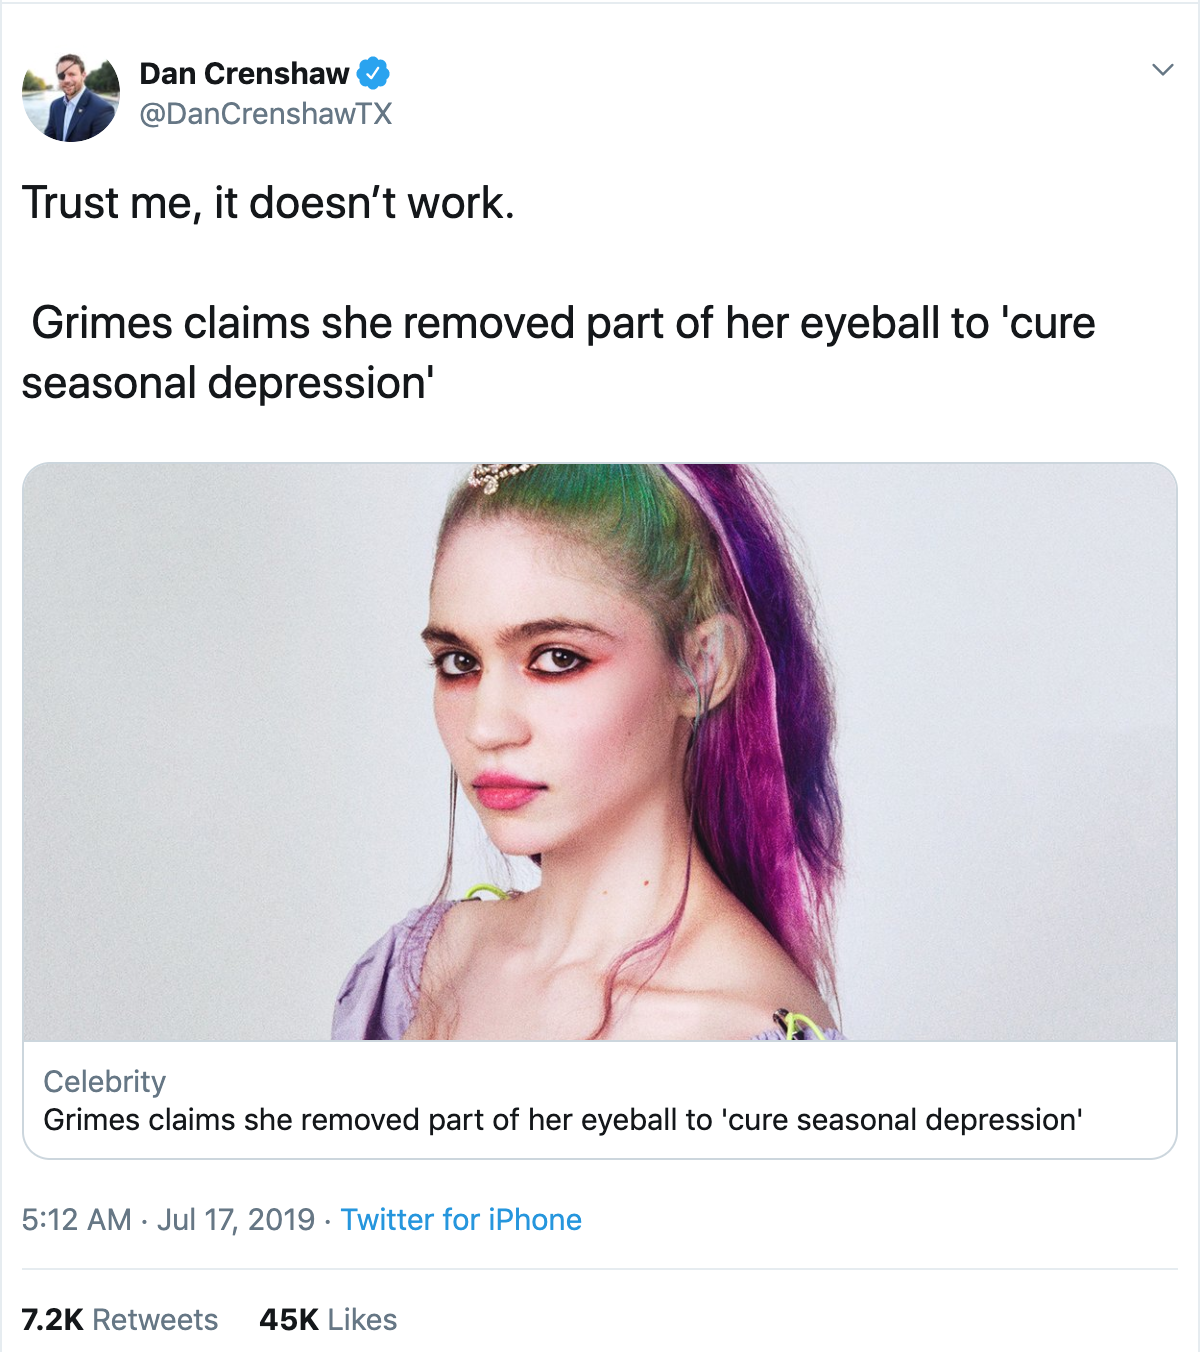 grimes pregnant topless - Dan Crenshaw Trust me, it doesn't work. Grimes claims she removed part of her eyeball to 'cure seasonal depression' Celebrity Grimes claims she removed part of her eyeball to 'cure seasonal depression Twitter for iPhone 45K